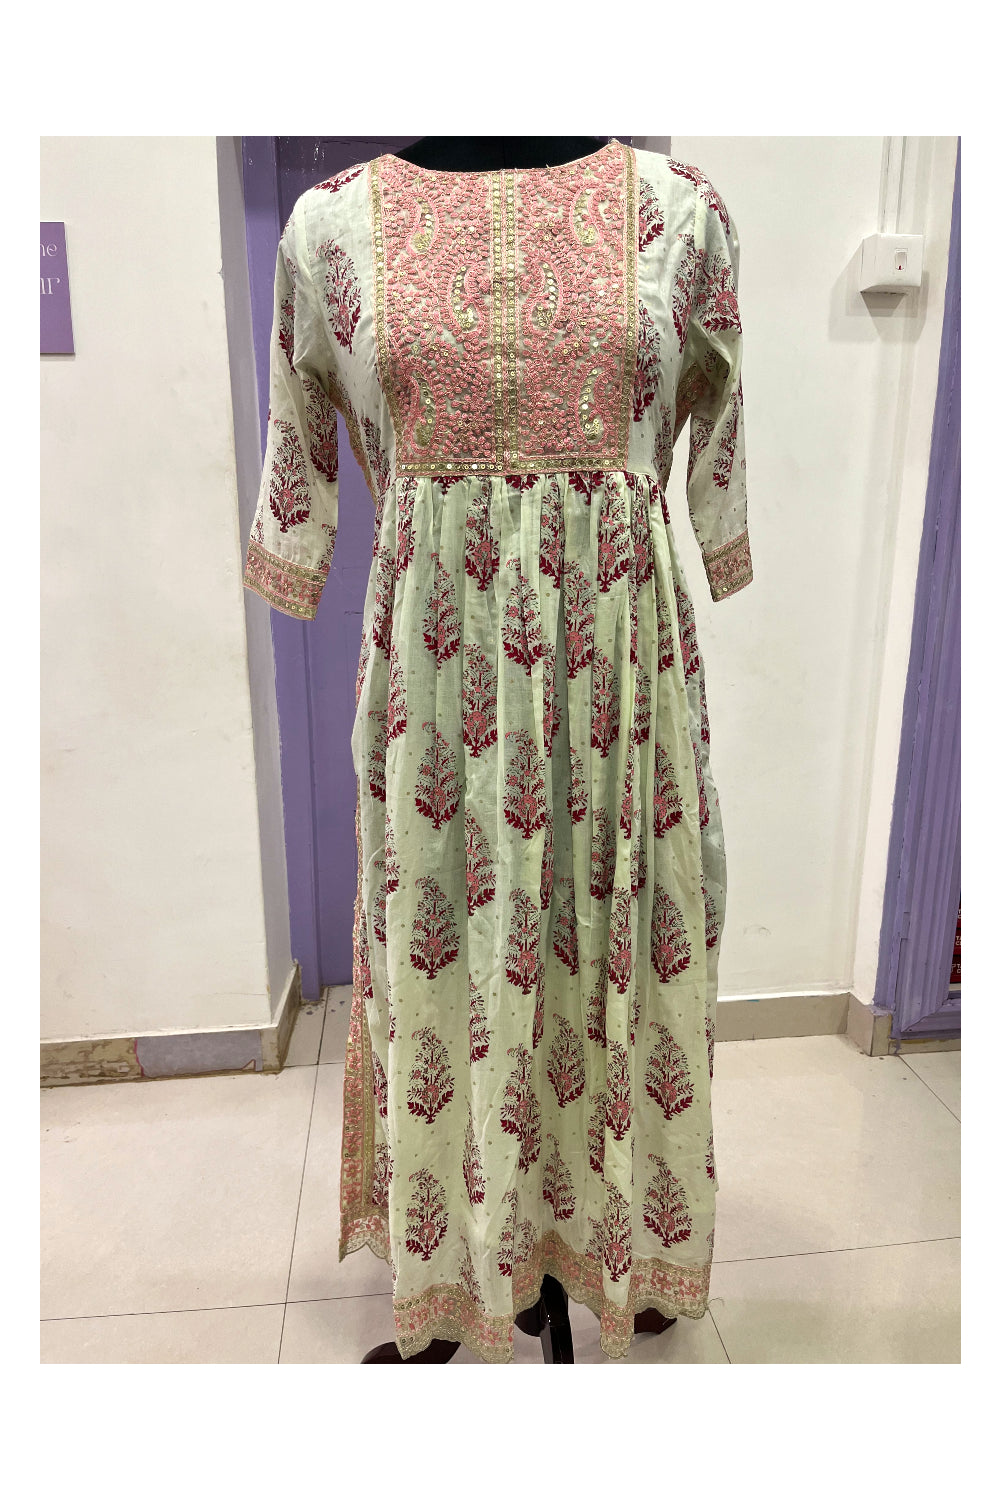 Southloom Stitched Cotton Salwar Set in Light Green and Floral Printed Designs